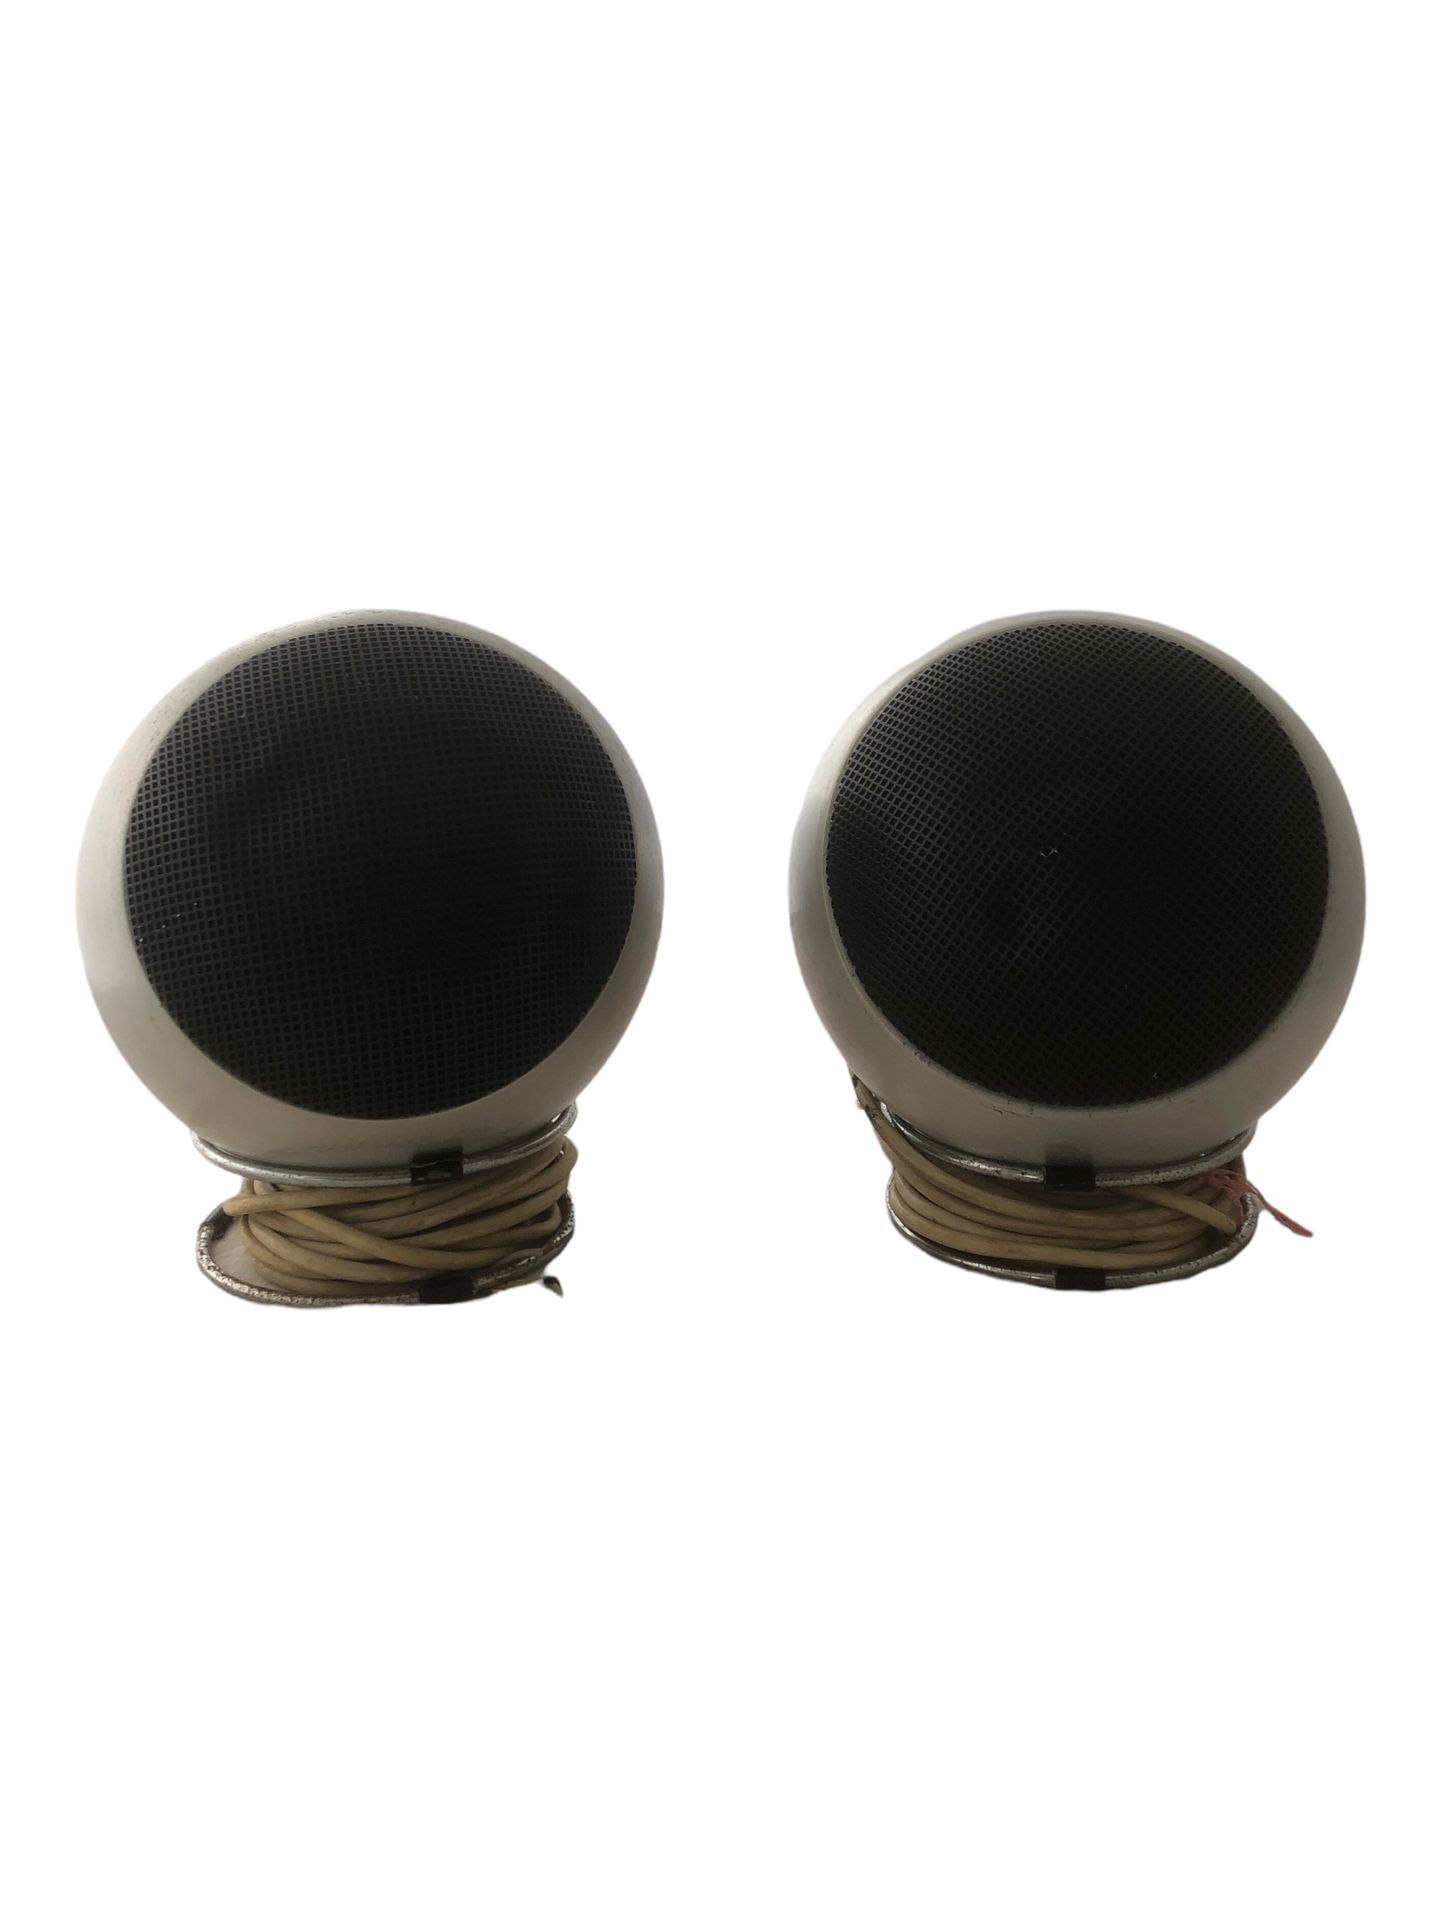 Null GRUNDIG, pair of spherical speakers and their support in stainless steel. H&hellip;